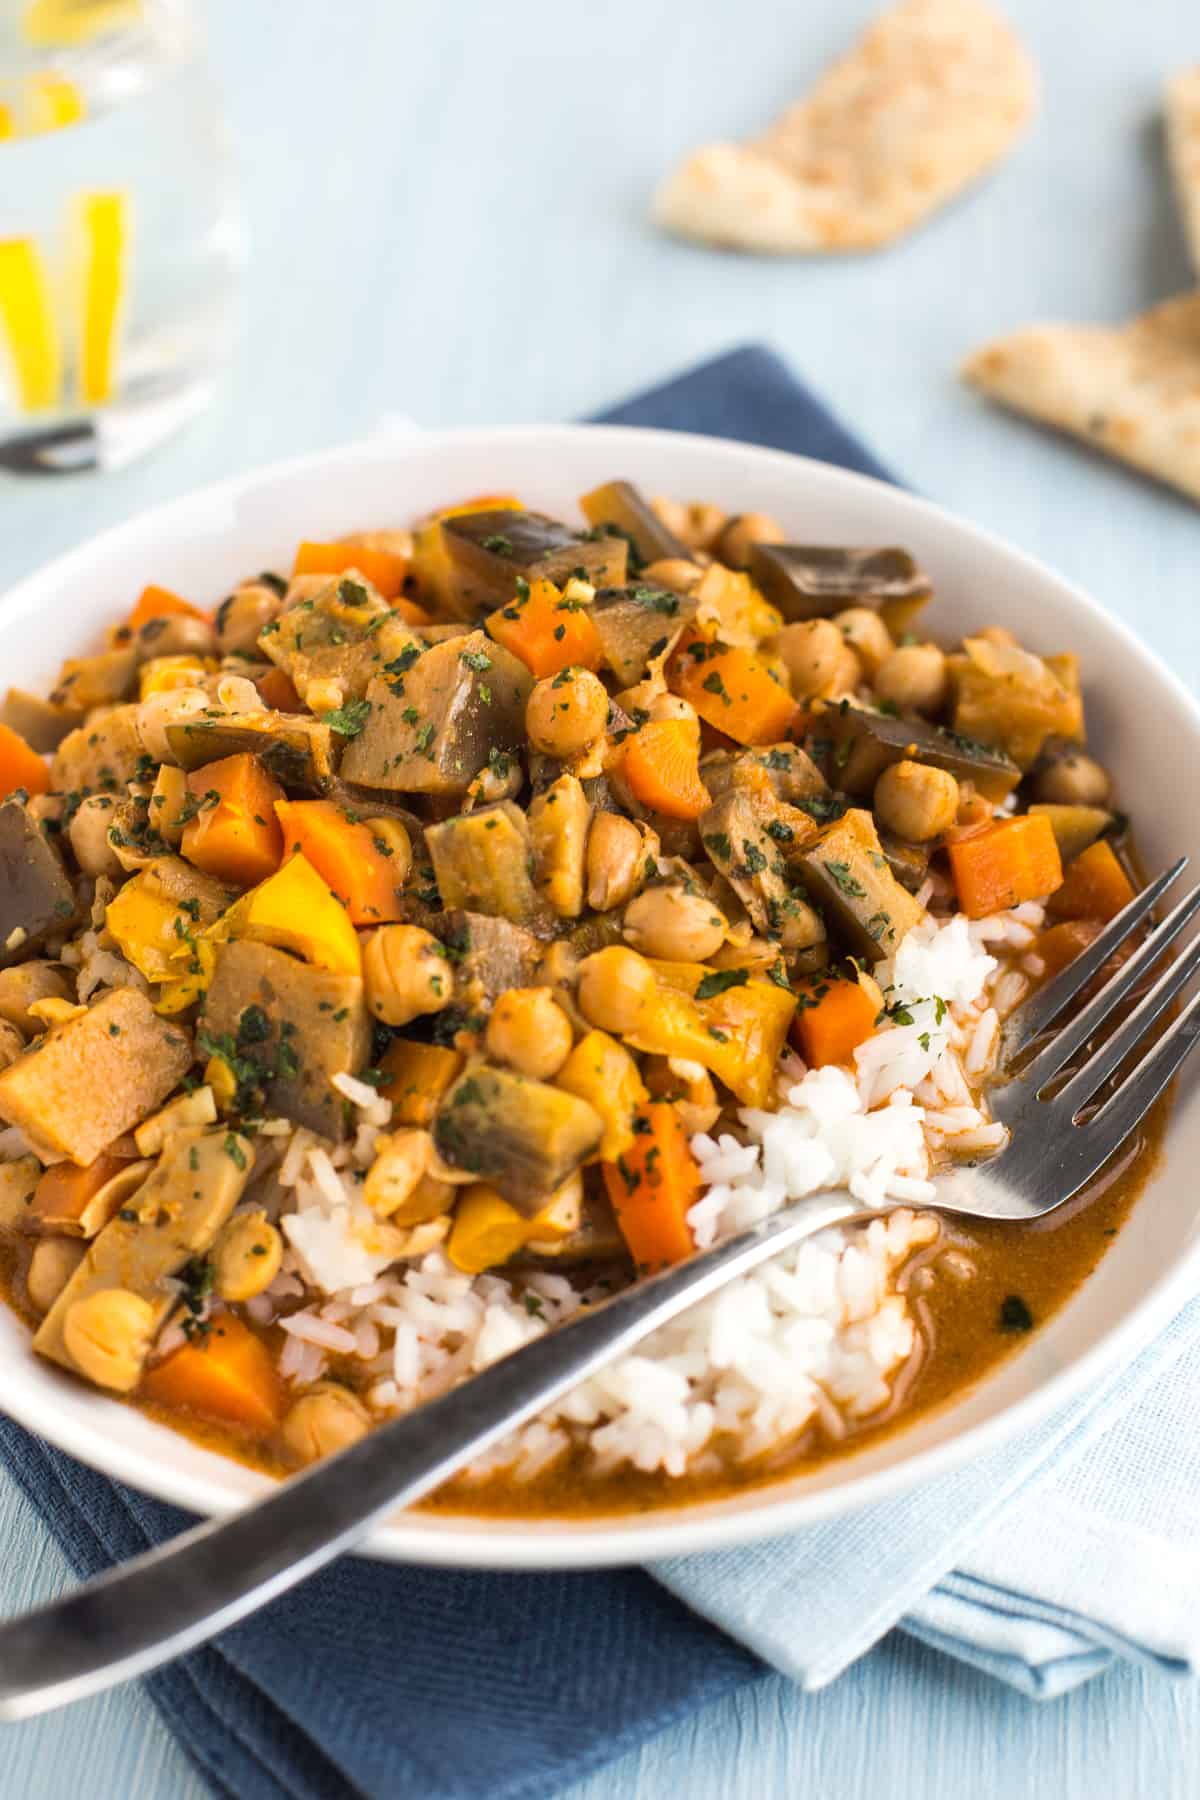 Bowlful of chickpea curry with vegetables and rice.